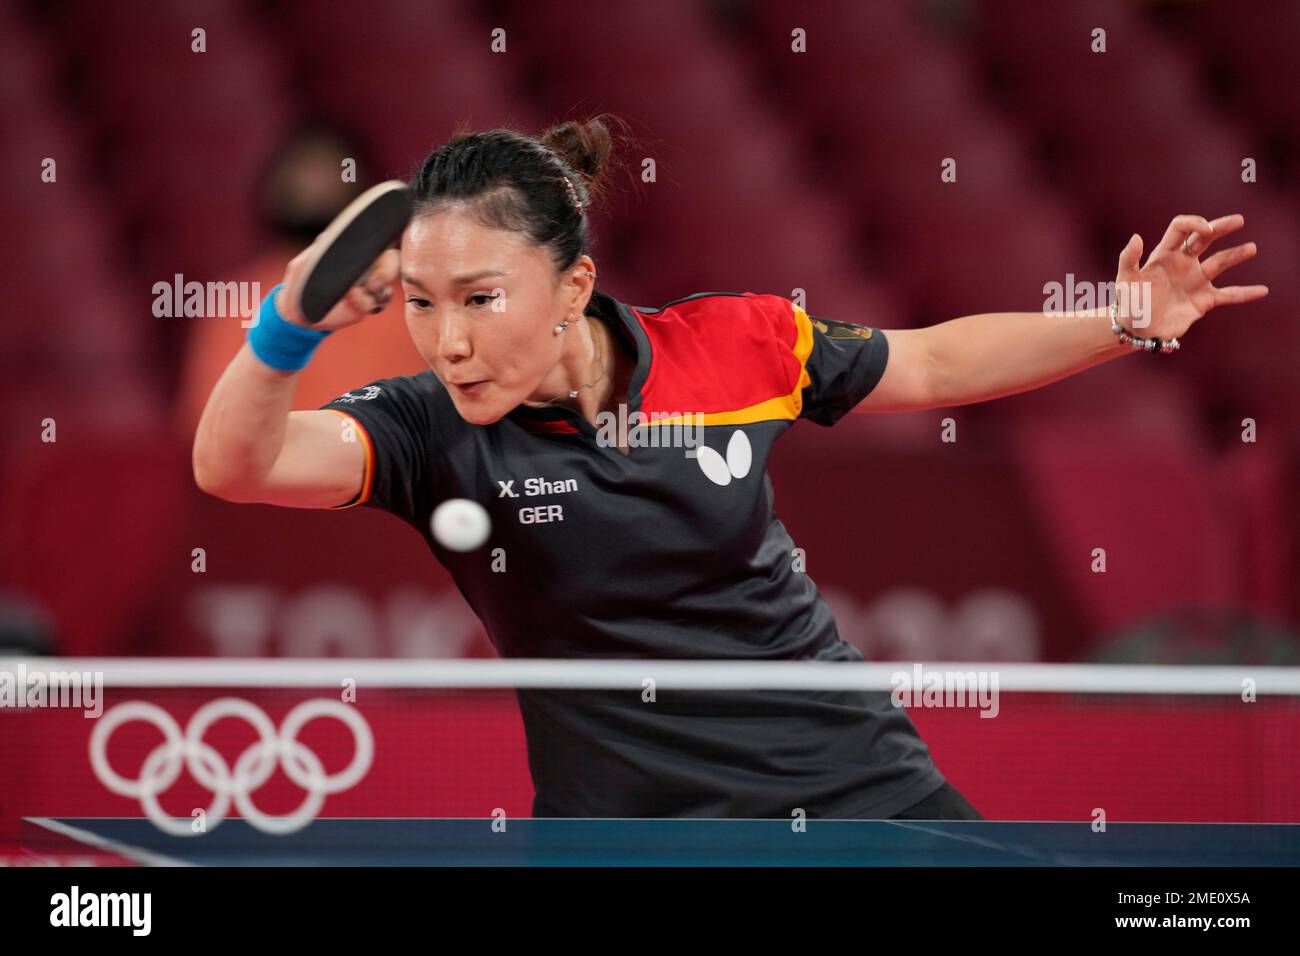 Germany's Shan Xiaona competes during the table tennis quarterfinal women's  team match against South Korea's Choi Hyo-joo at the 2020 Summer Olympics,  Tuesday, Aug. 3, 2021, in Tokyo. (AP Photo/Kin Cheung Photo